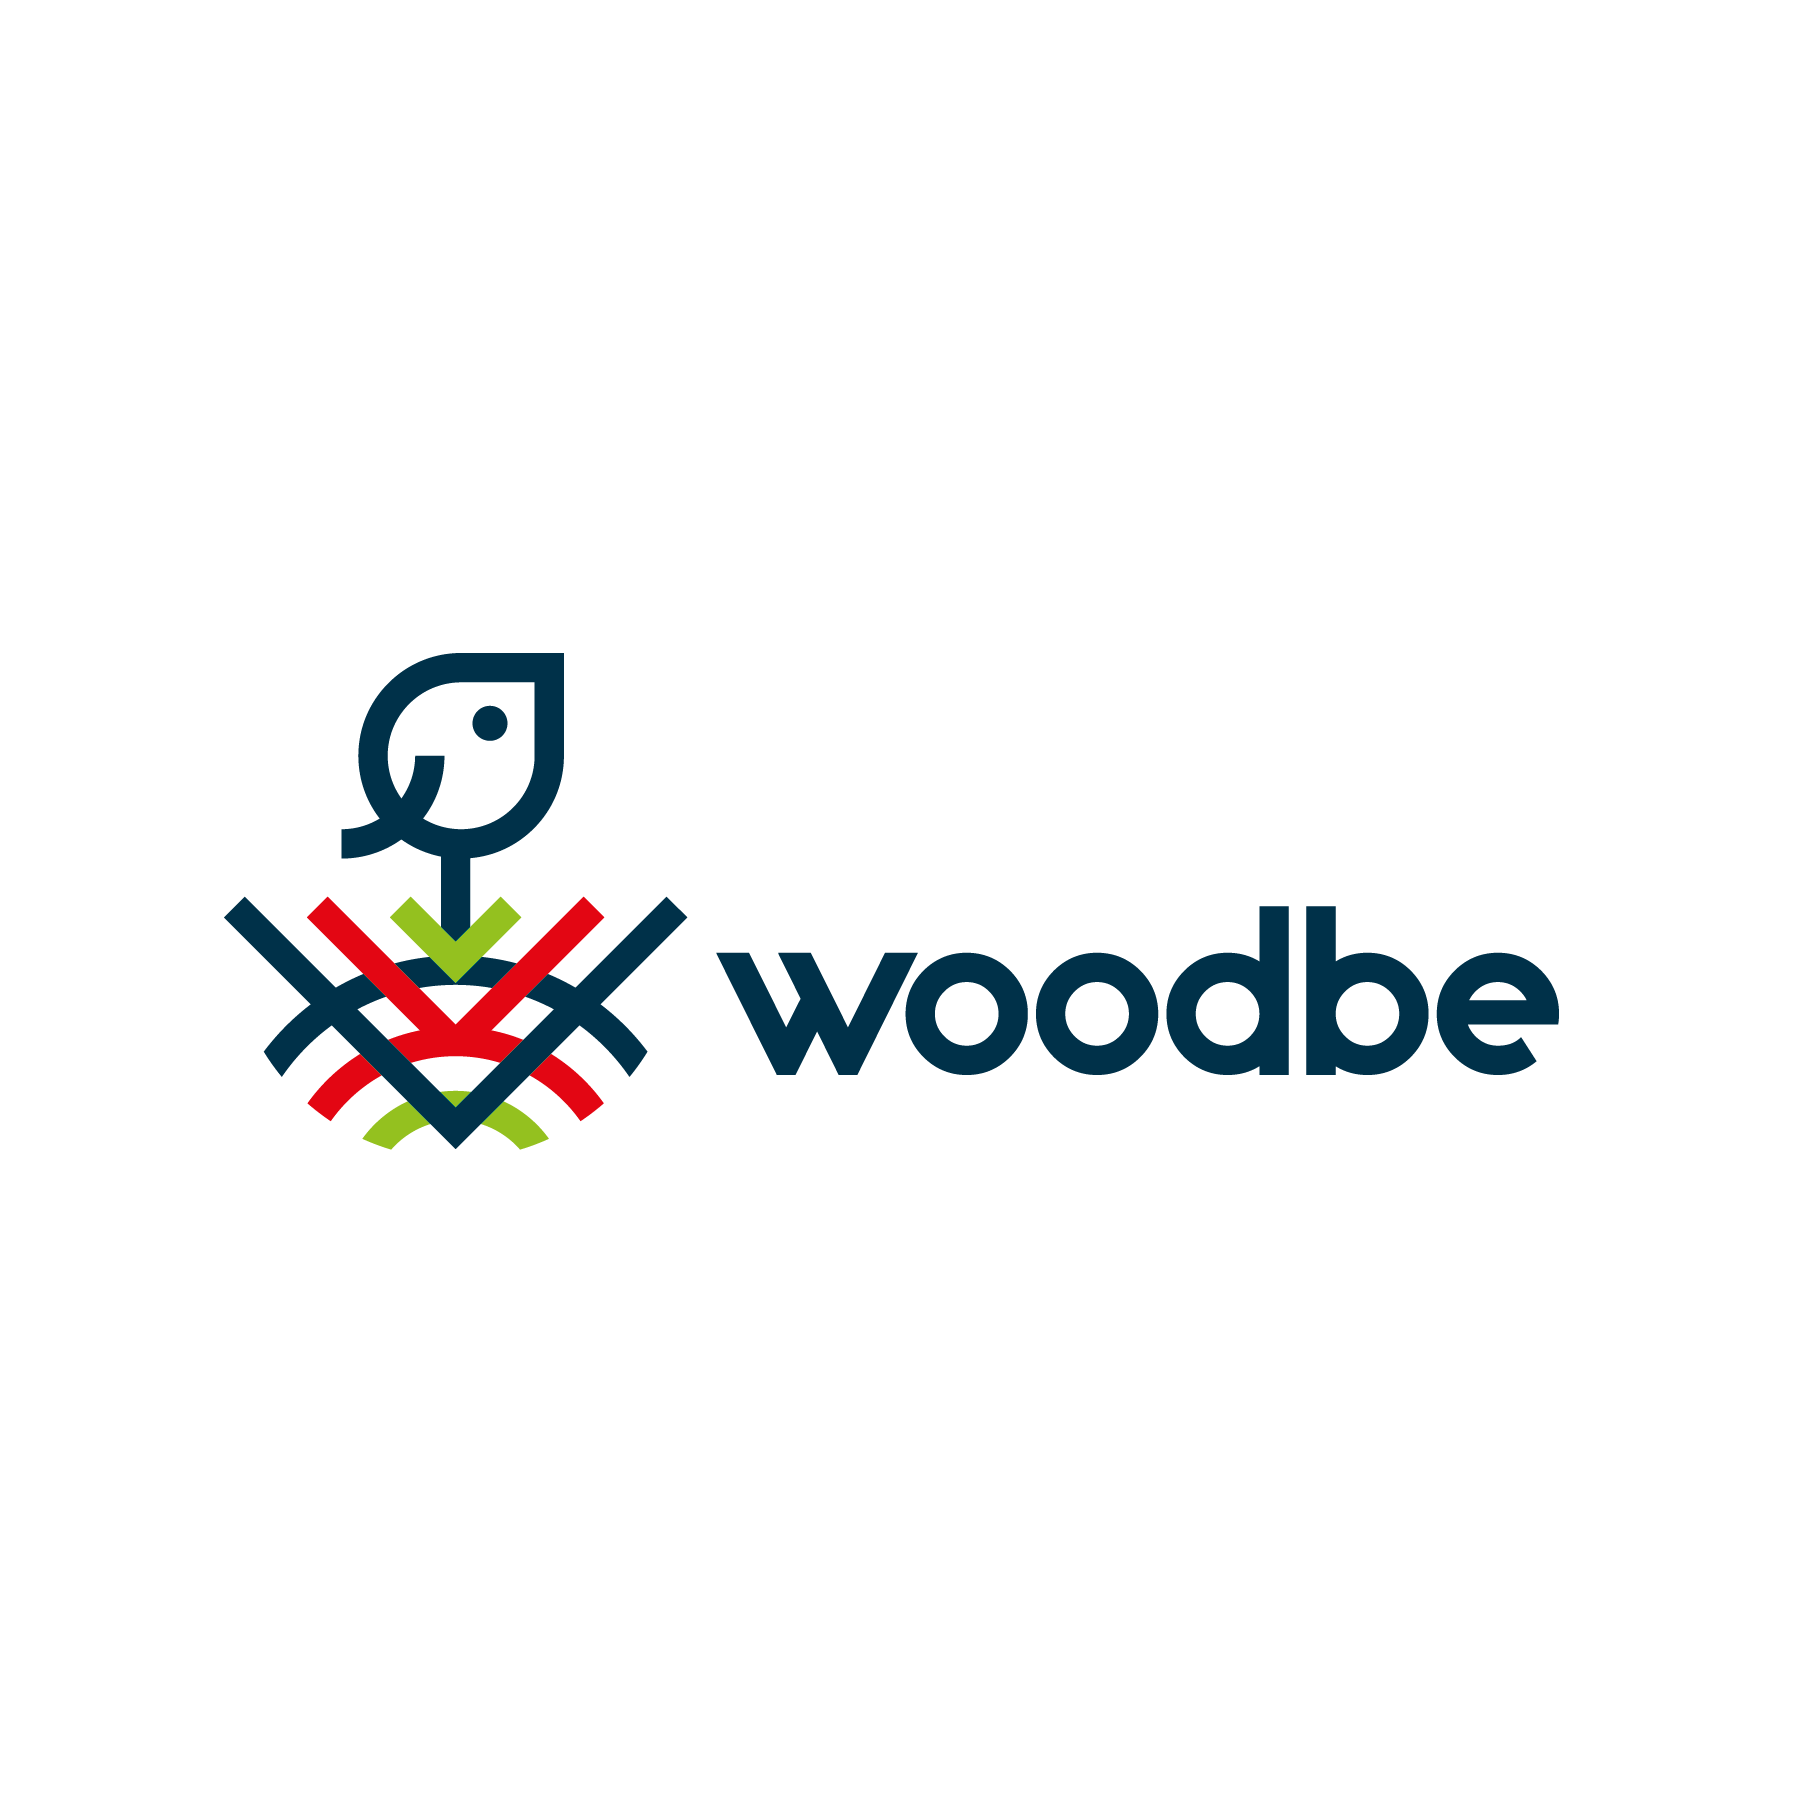 WoodBe logo design by logo designer OTLICHNOSTI for your inspiration and for the worlds largest logo competition